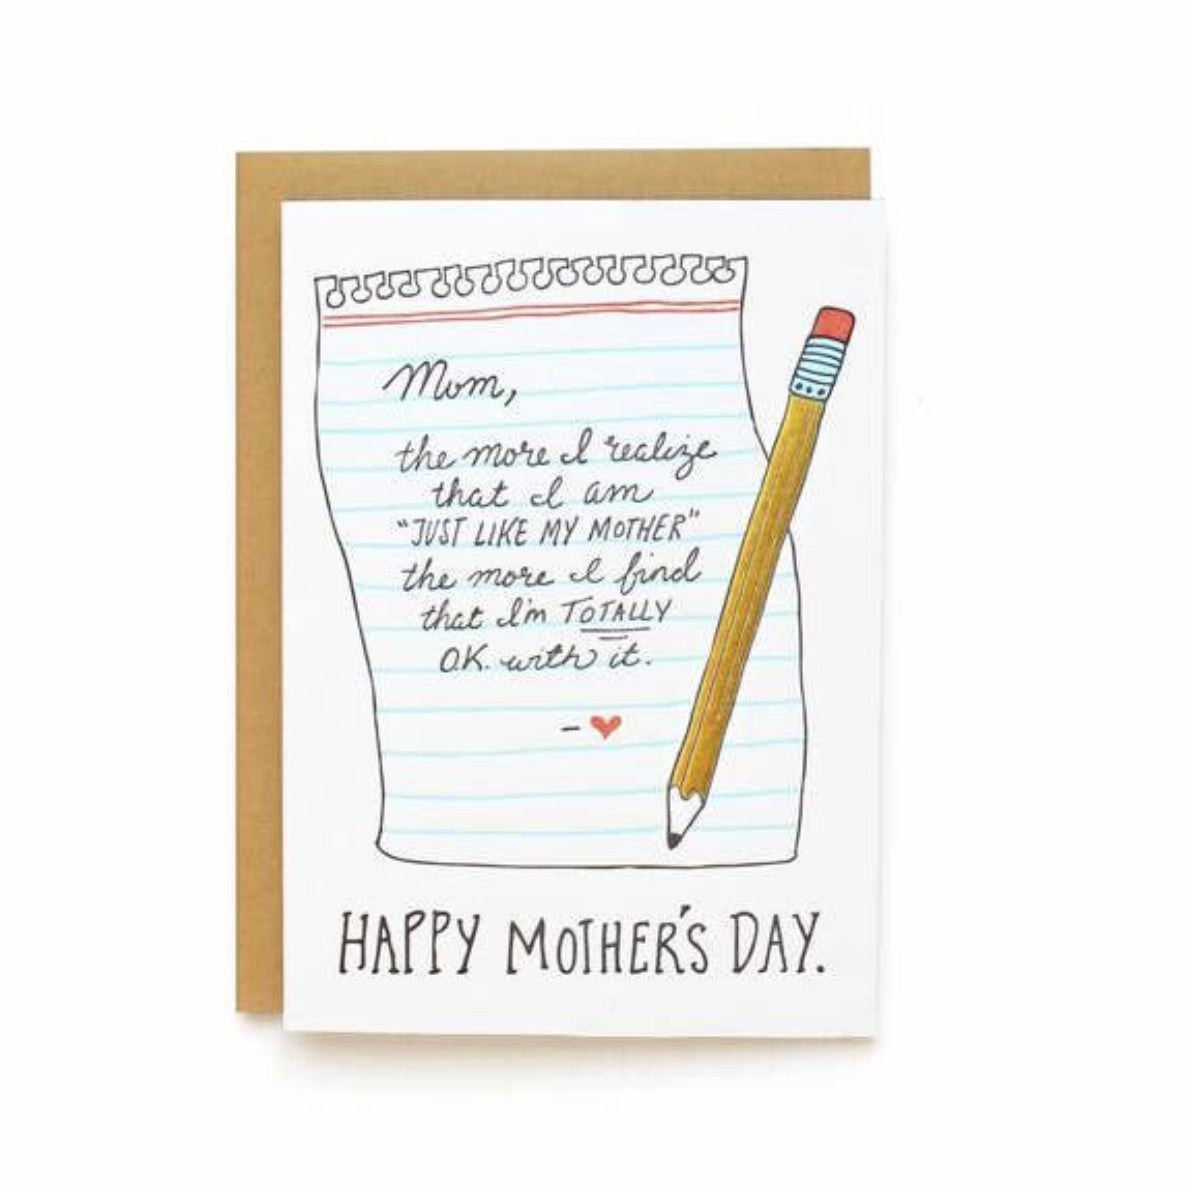 Mom mothers day card